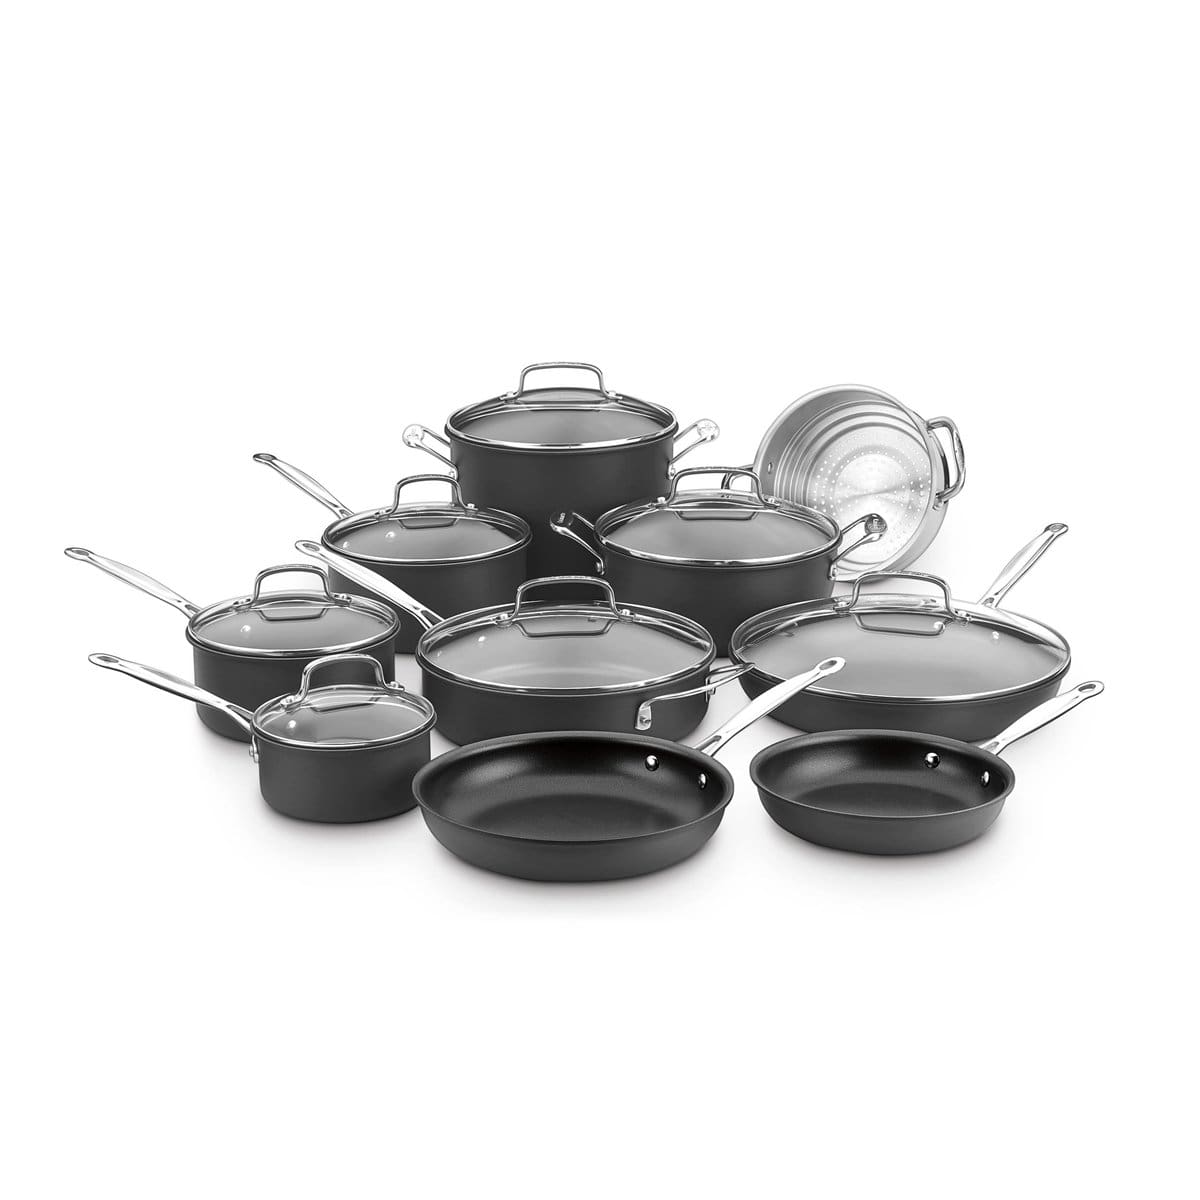 https://cdn.shopify.com/s/files/1/0474/2338/9856/products/cuisinart-cuisinart-chef-s-classic-hard-anodized-17-piece-cookware-set-086279101341-19593469034656_1600x.jpg?v=1604183131